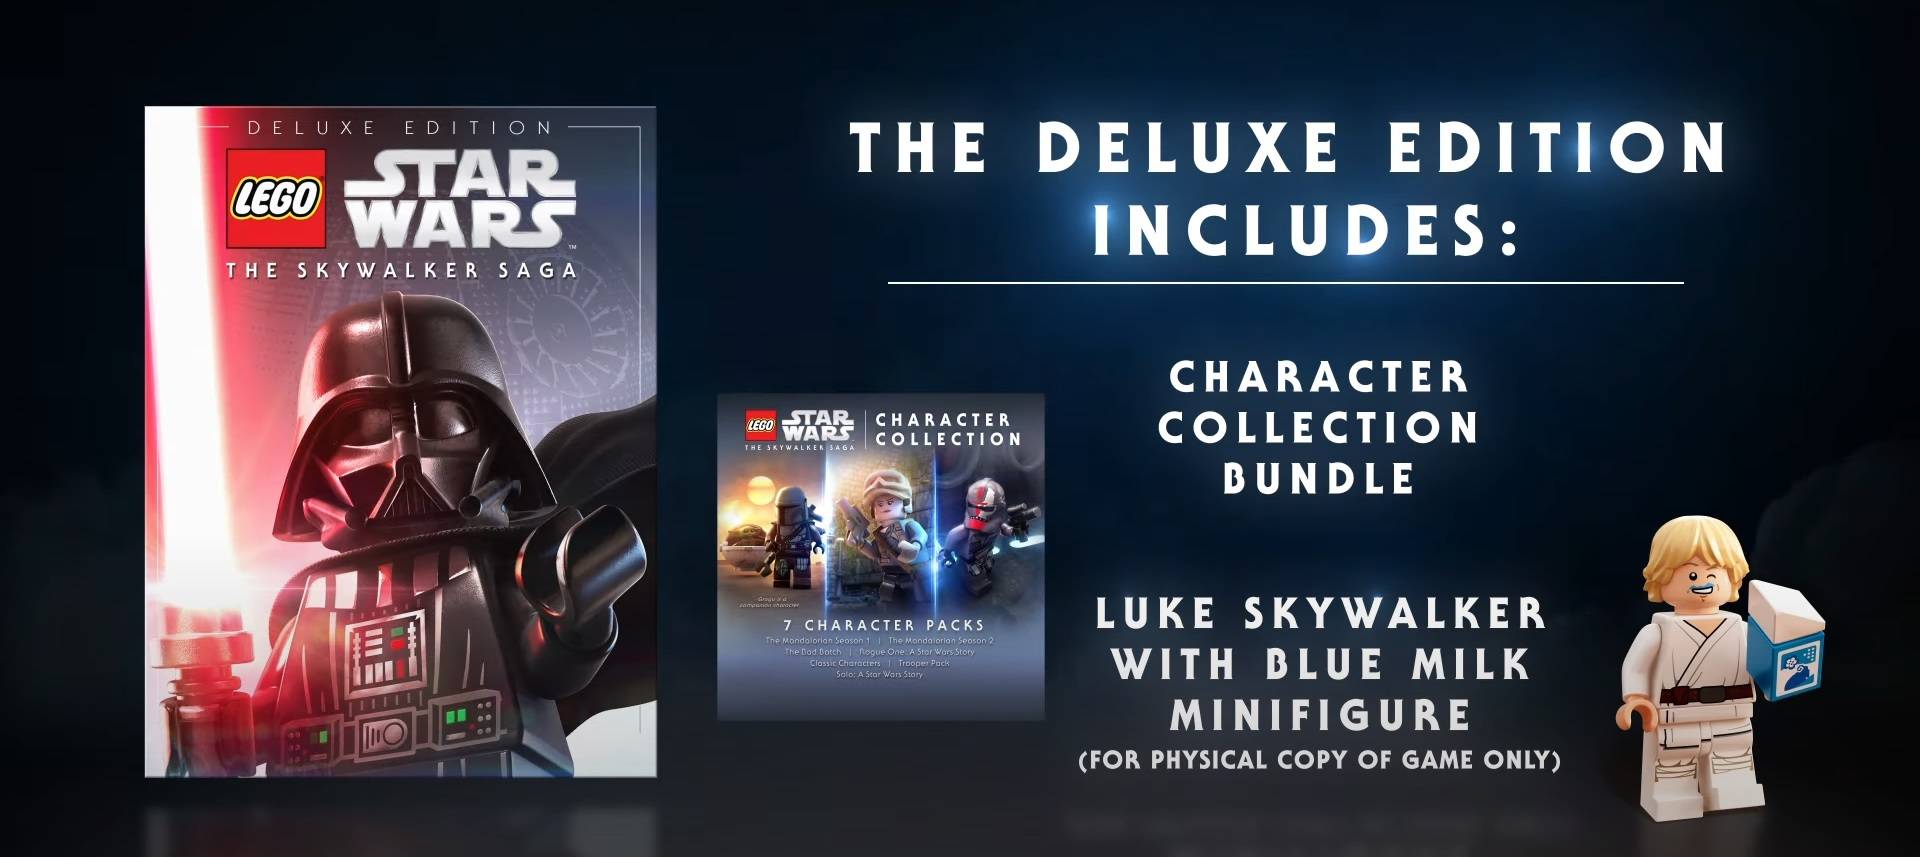 What Comes In The Lego Star Wars The Skywalker Saga Deluxe Edition